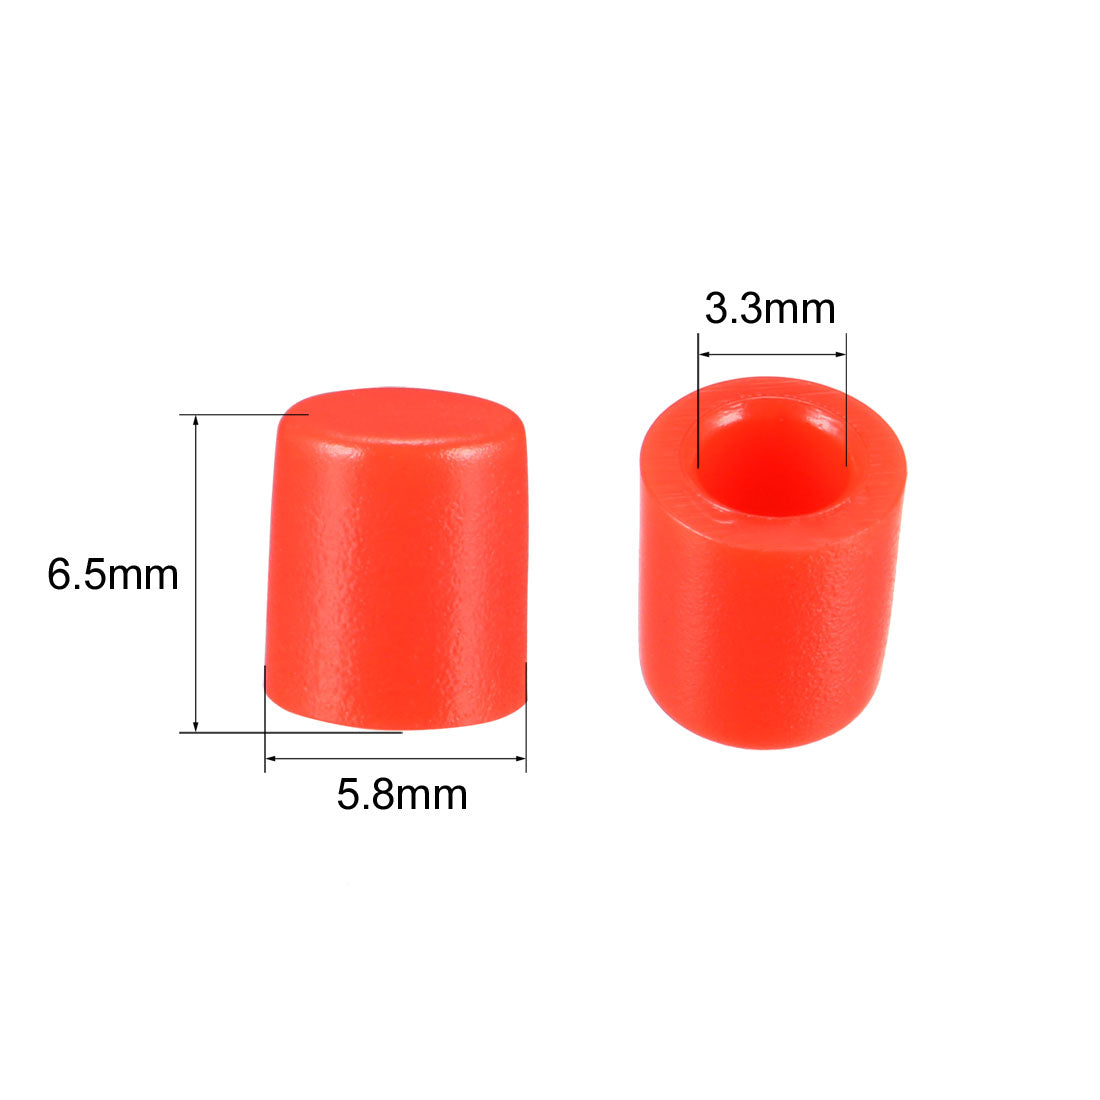 uxcell Uxcell 20Pcs 3.3mm Hole Dia Plastic Push Button Tactile Switch Caps Cover Keycaps Protector Red for 6x6 Micro Switch